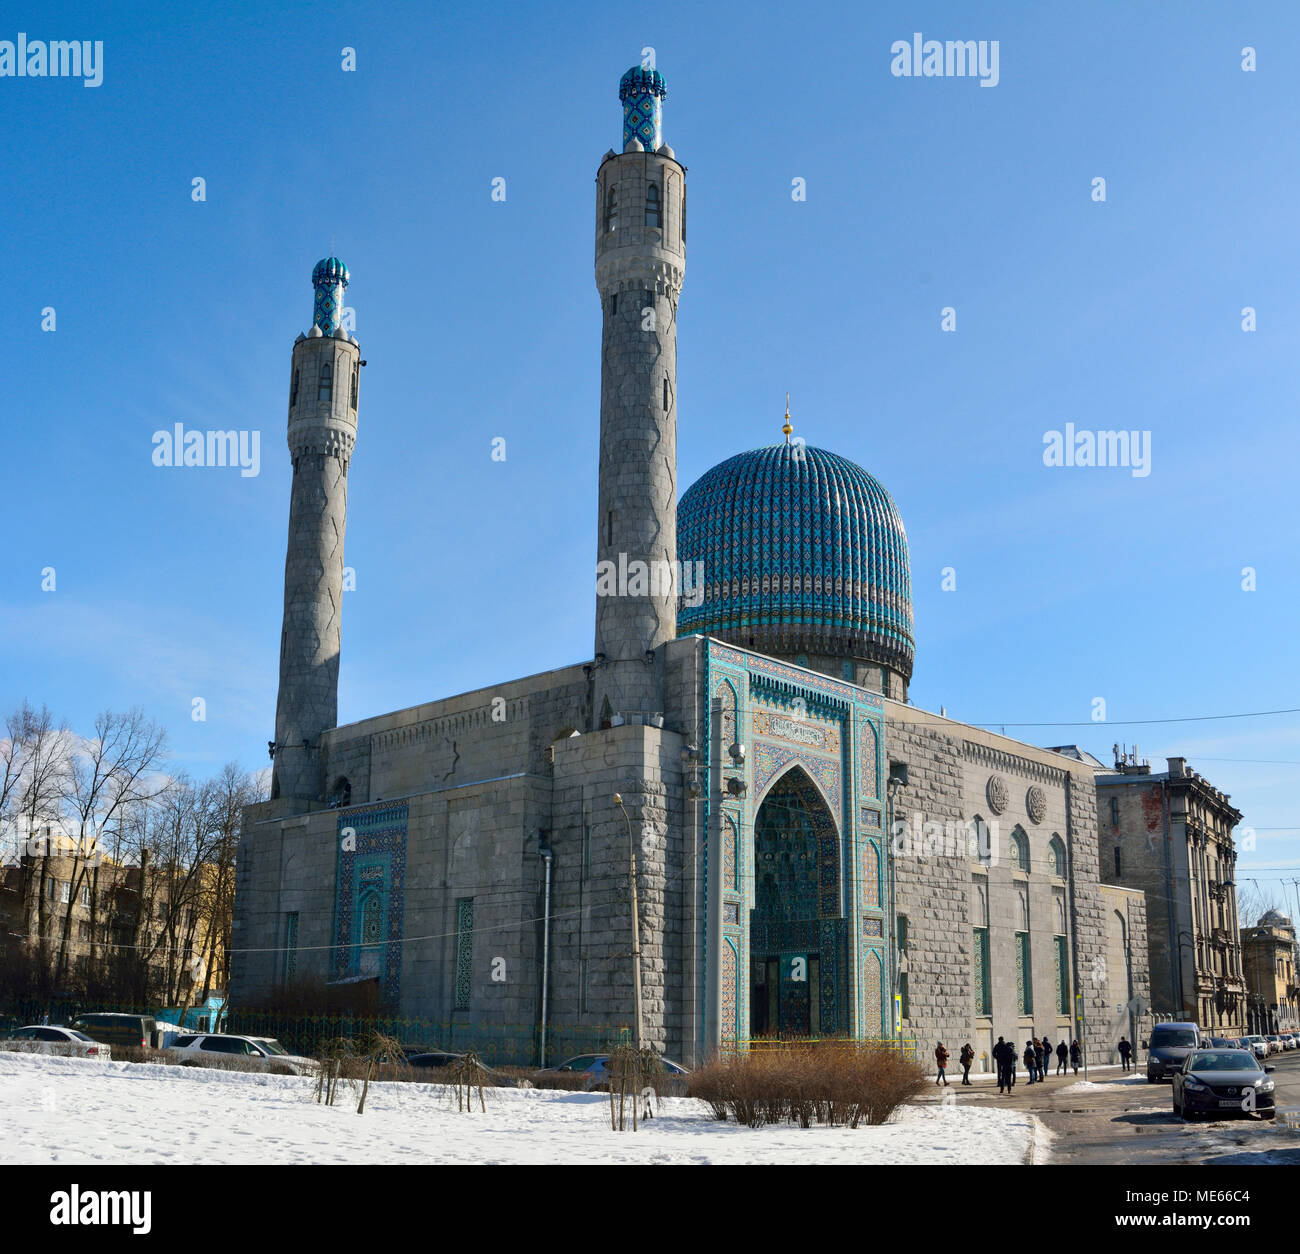 St Petersburg, Russia - March 27, 2018. Exterior view of the Mosque building, dating from 1910-1914, on Kronversky pr in St Petersburg, with surroundi Stock Photo